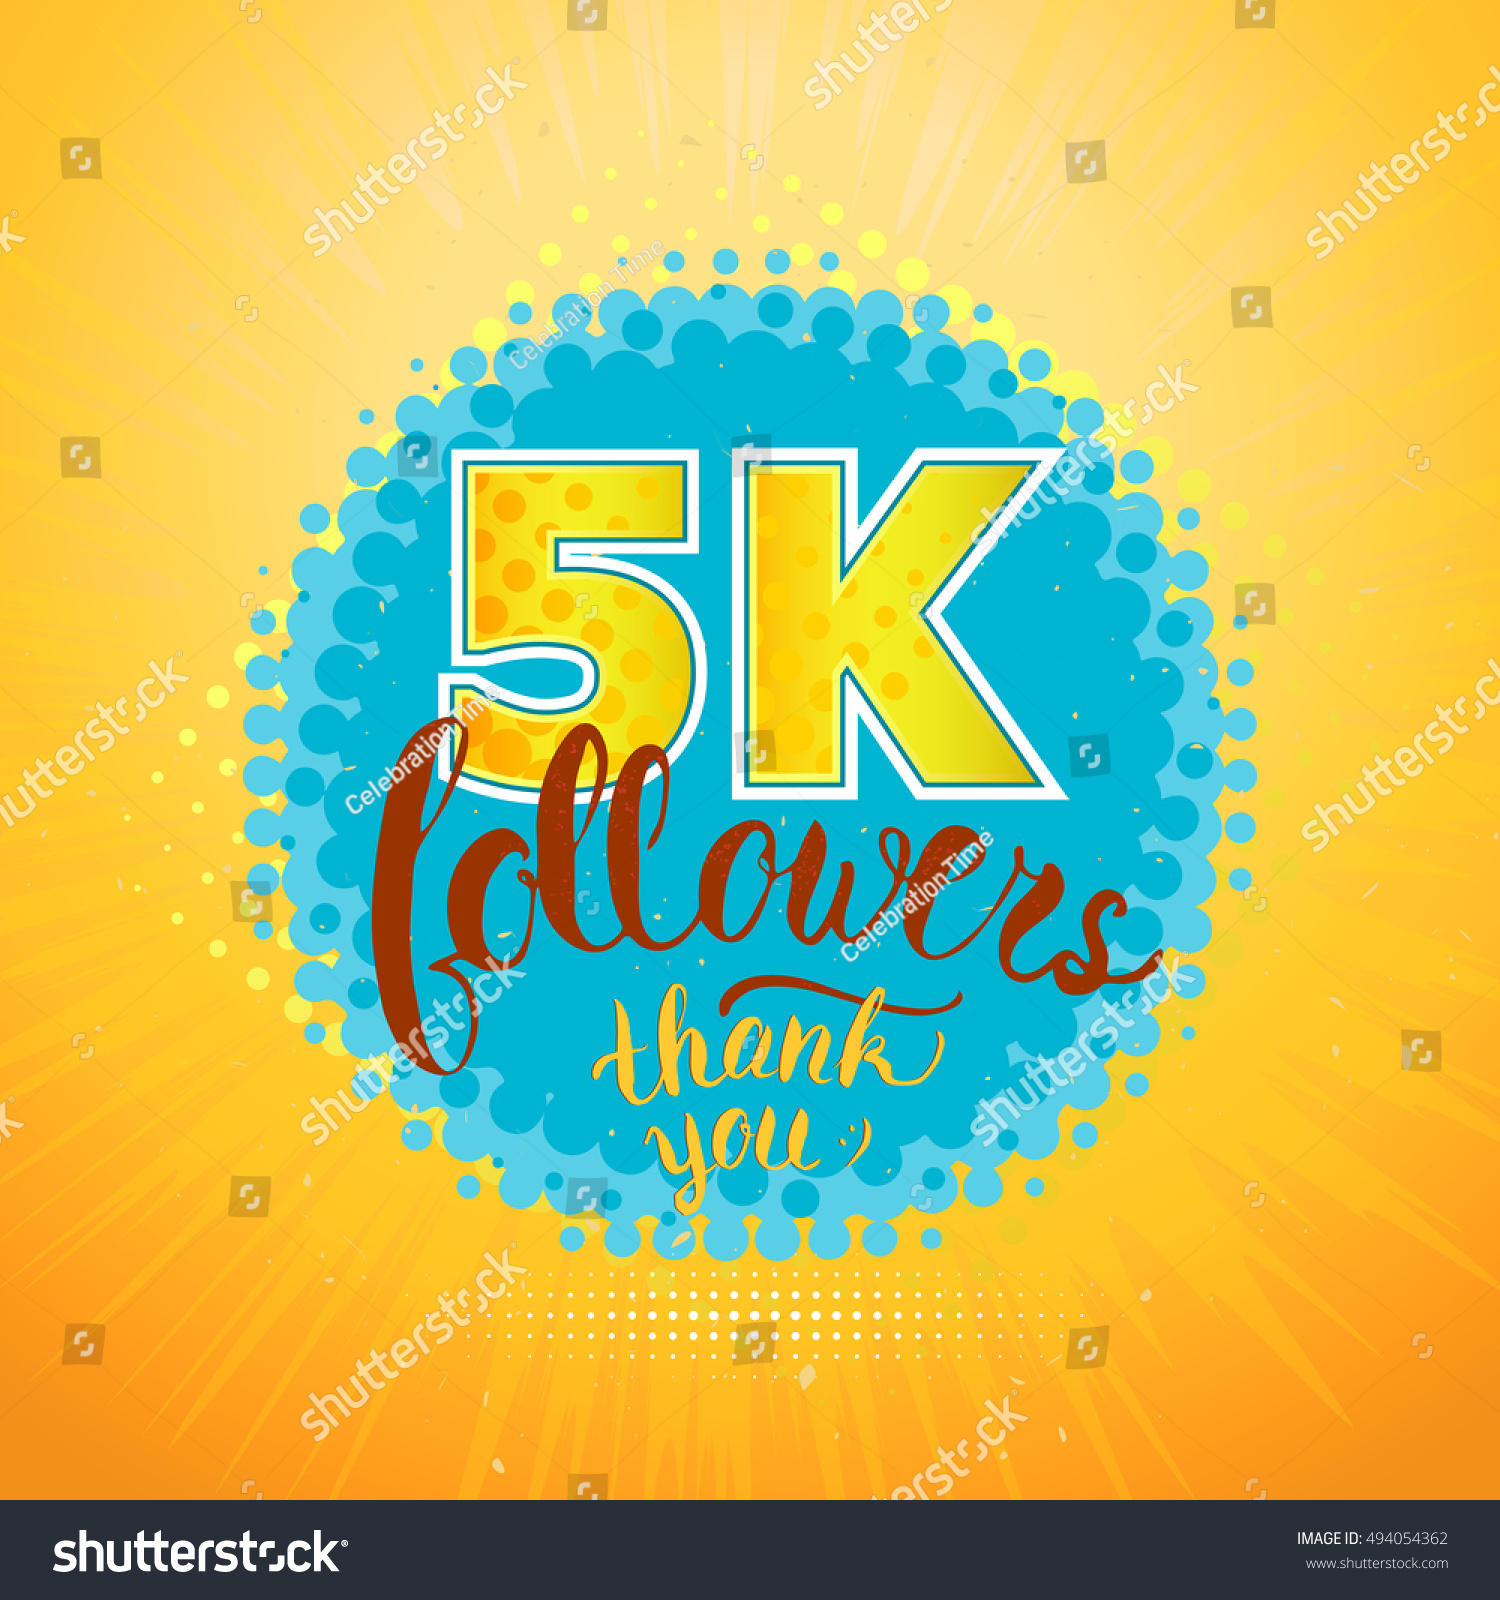 thank you 5k followers card five thousand followers !   - images about 5kfollowers on instagram